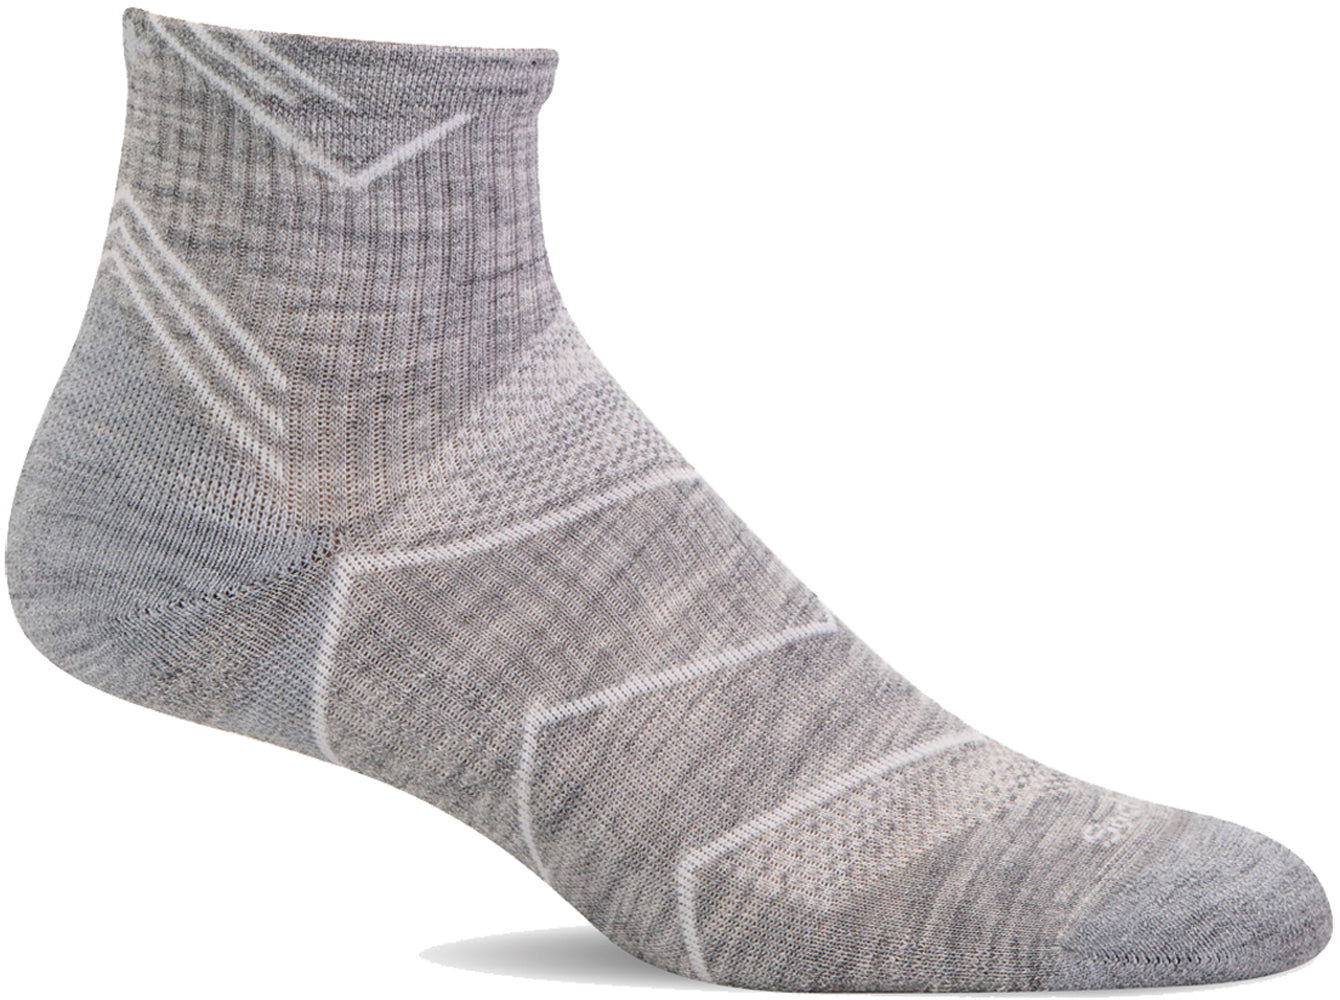 Sockwell Women's Incline Quarter Sock in Grey SMU color from the side